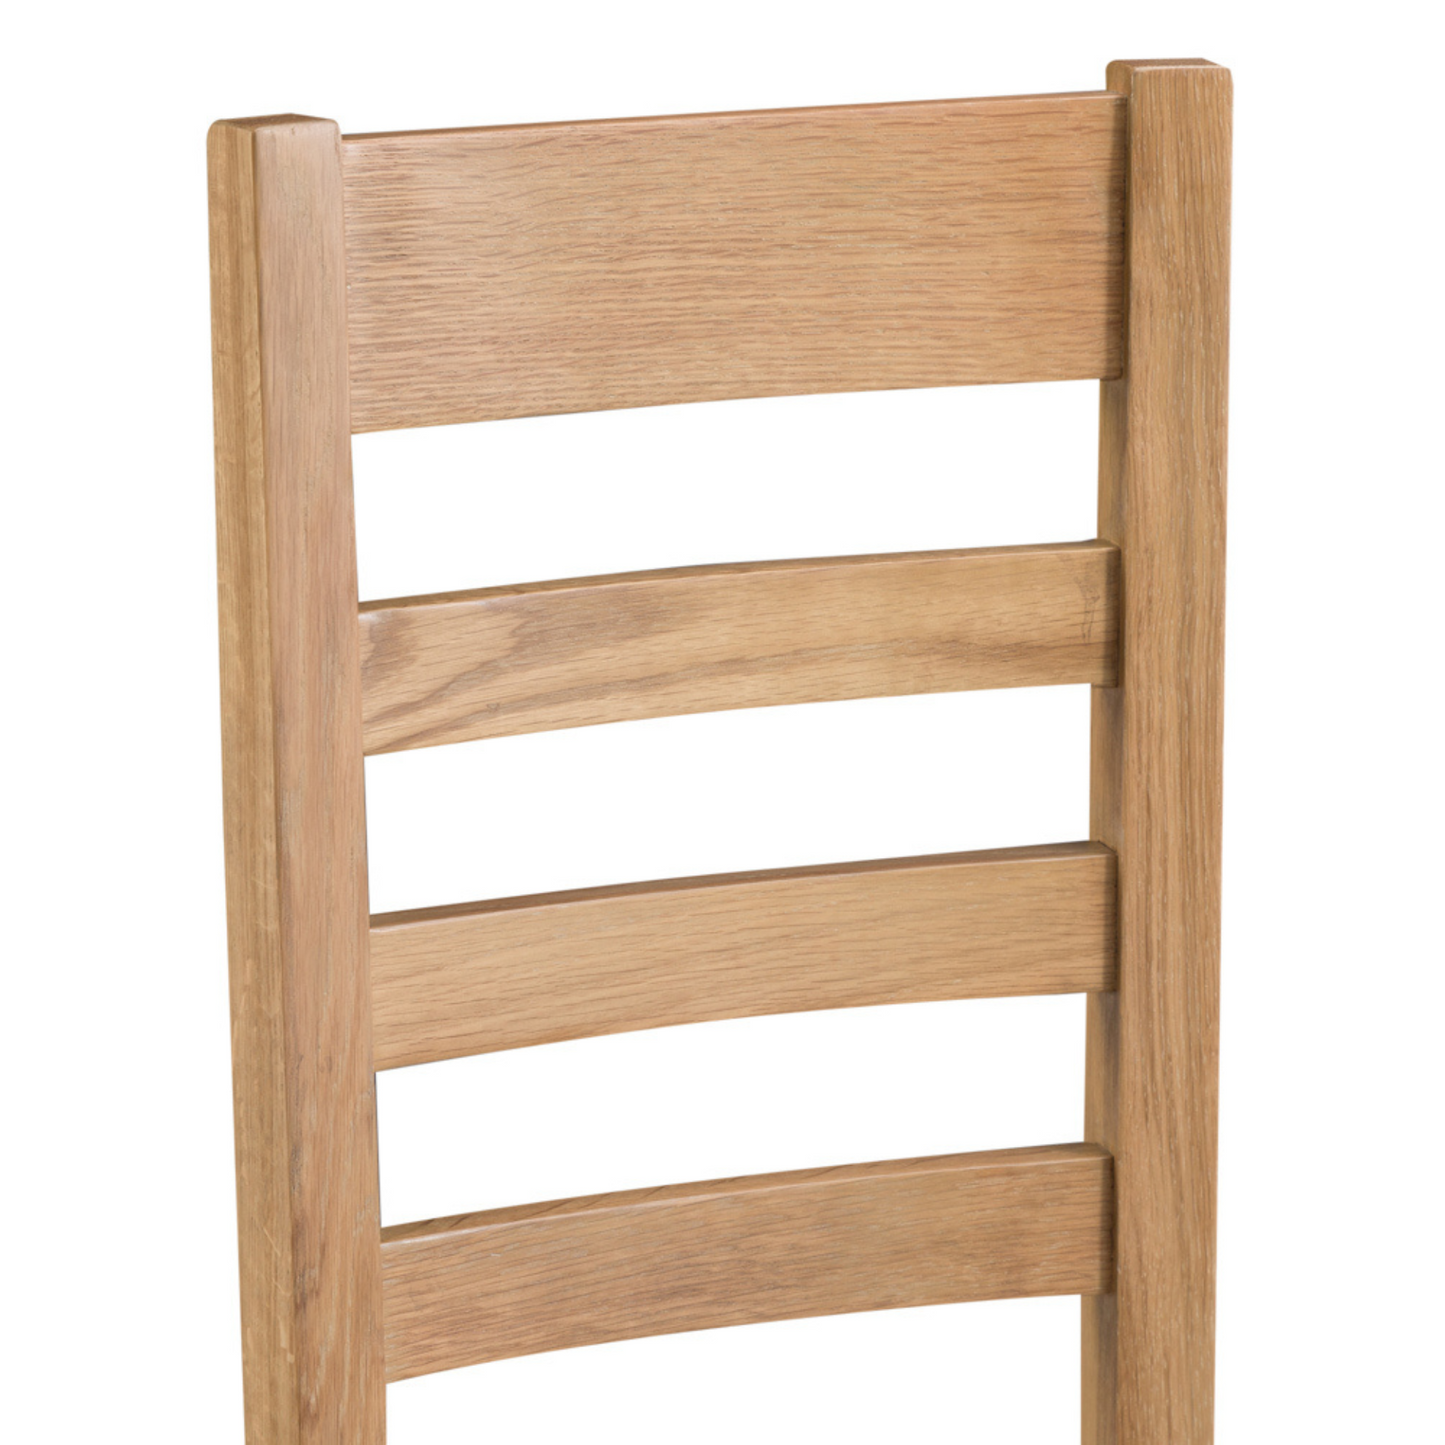 Oakham Ladder Solid Seat Dining Chair